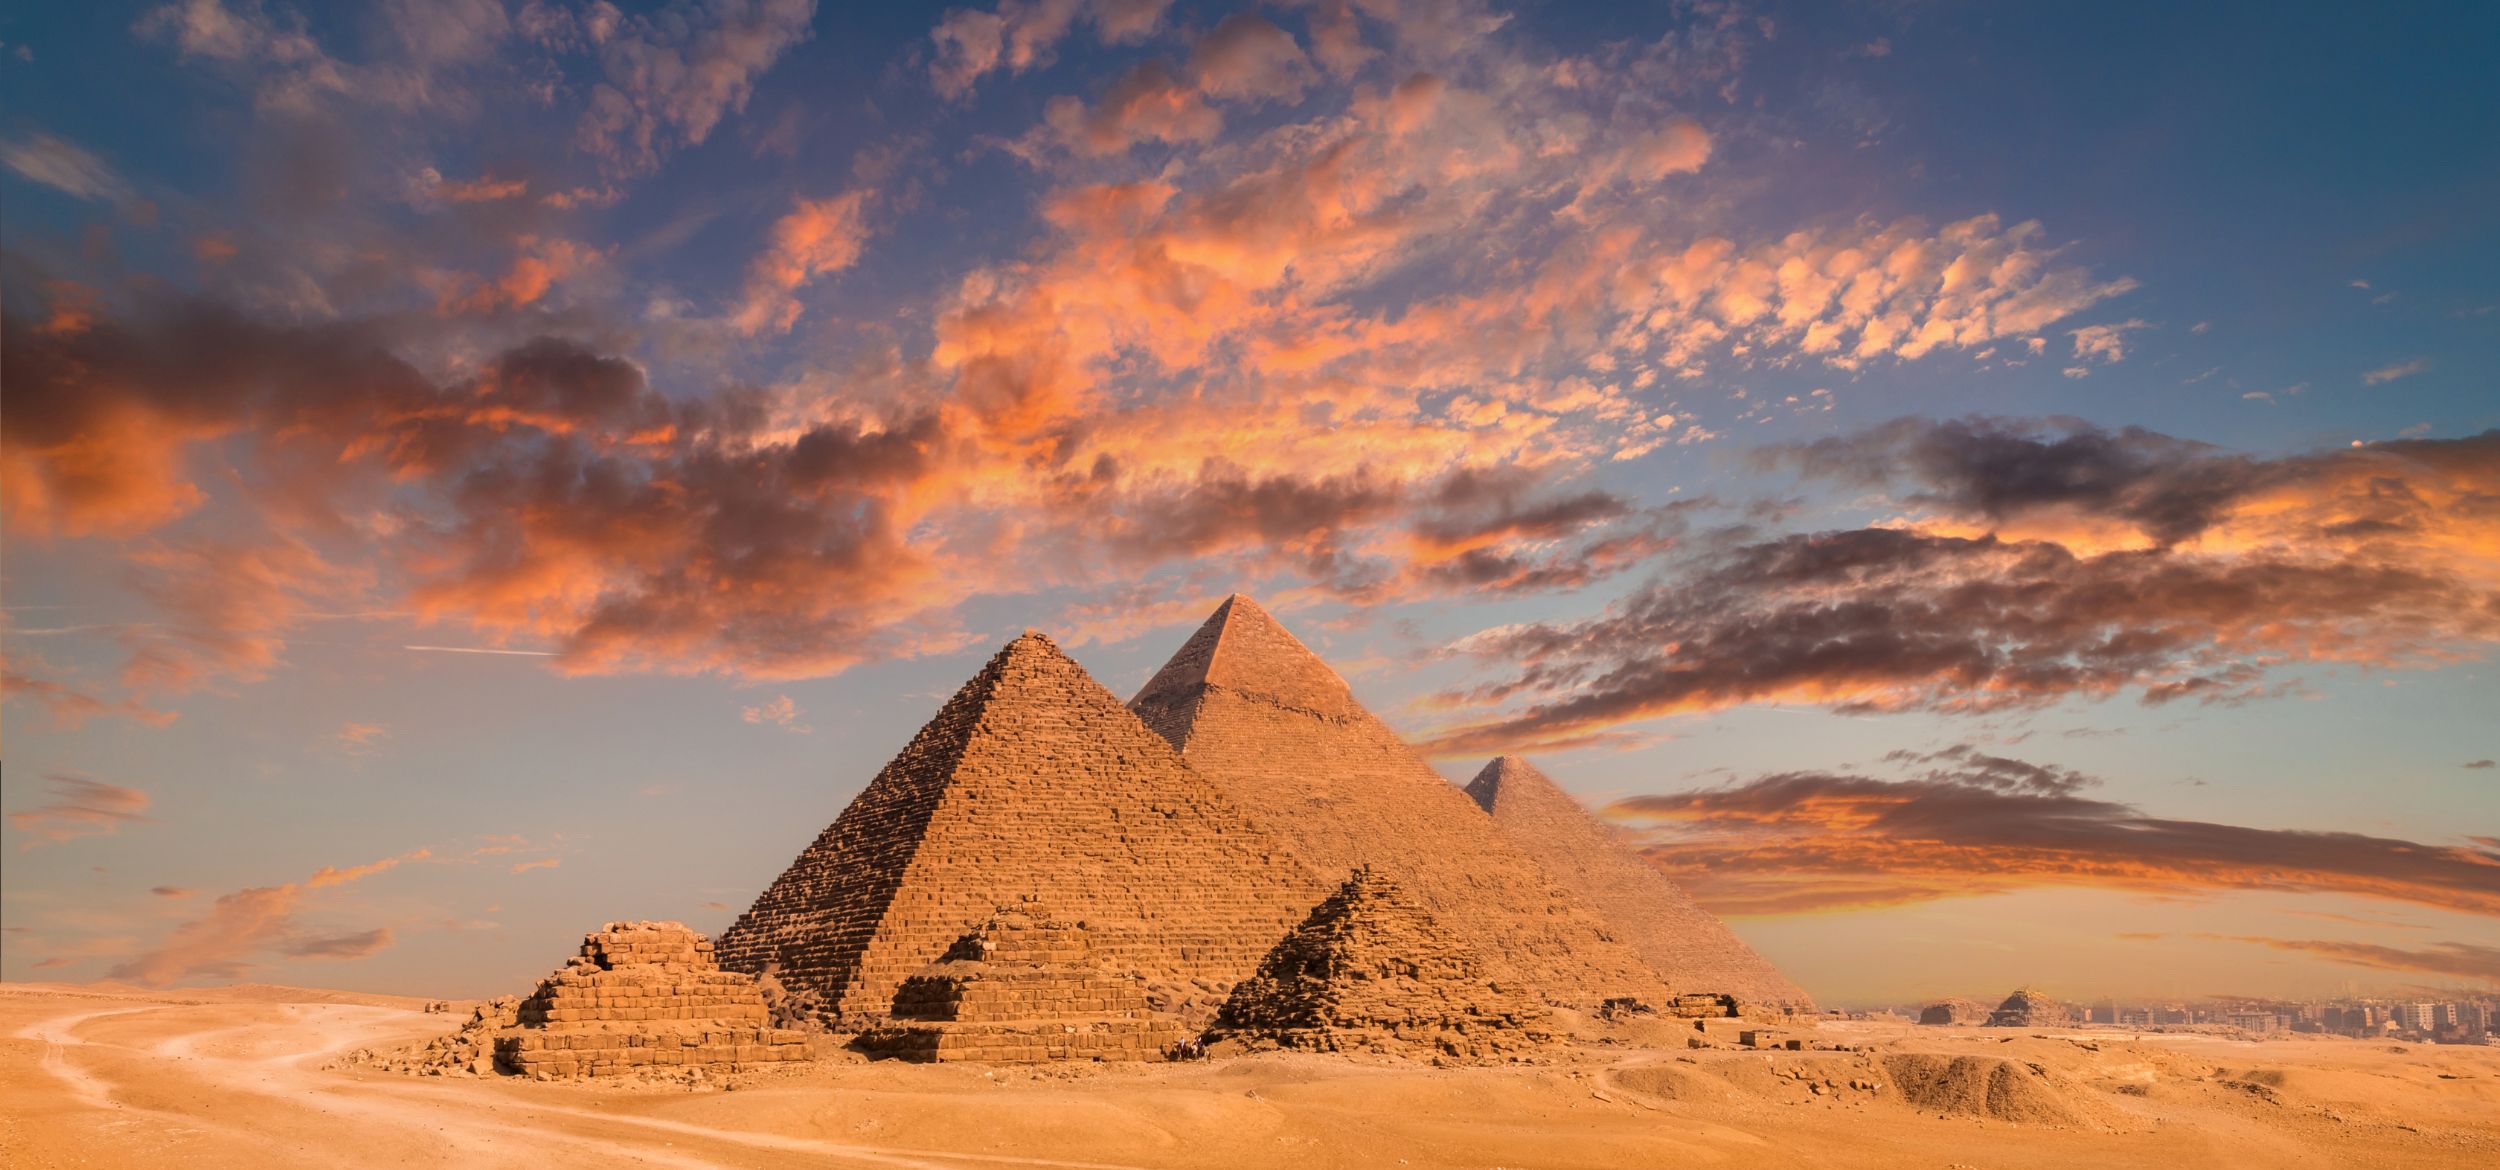 Sunlit clouds move over the Pyramids of Giza in Egypt.